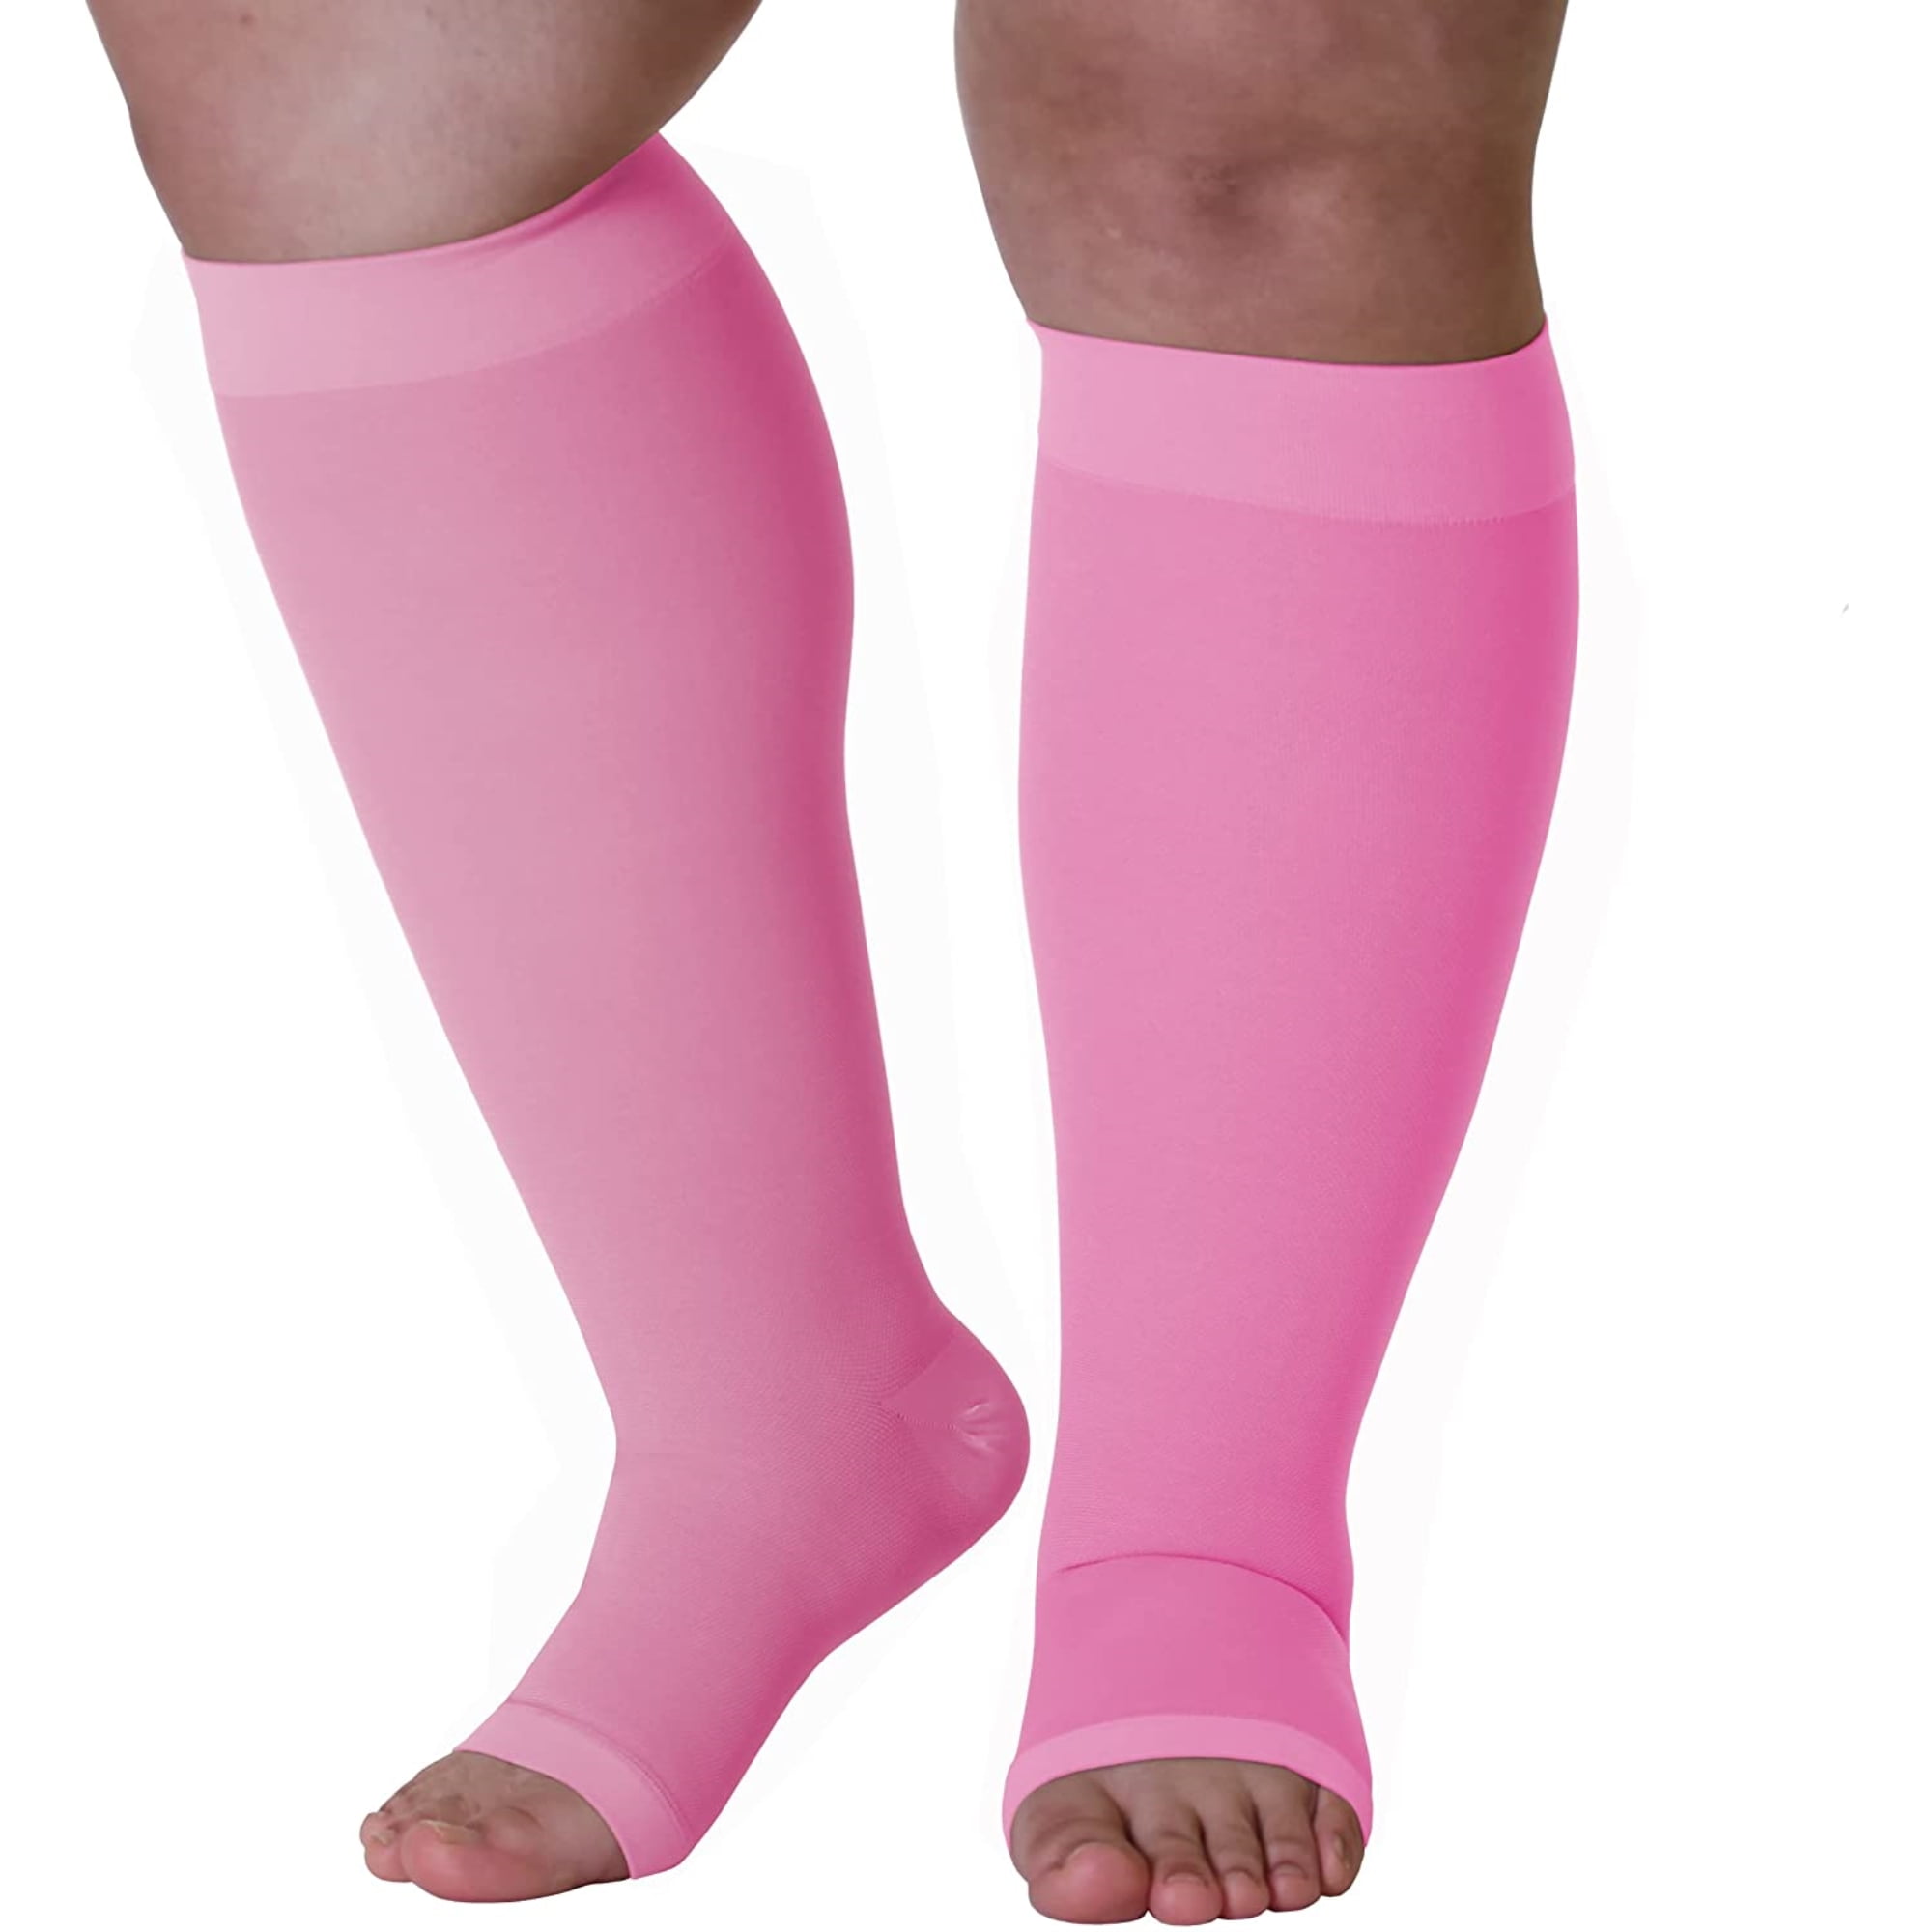 3XL Plus Size Wide Calf Support Socks for Men & Women Circulation 20-30mmHg  - Opaque Compression Socks with Open Toe for Varicose Veins Circulation